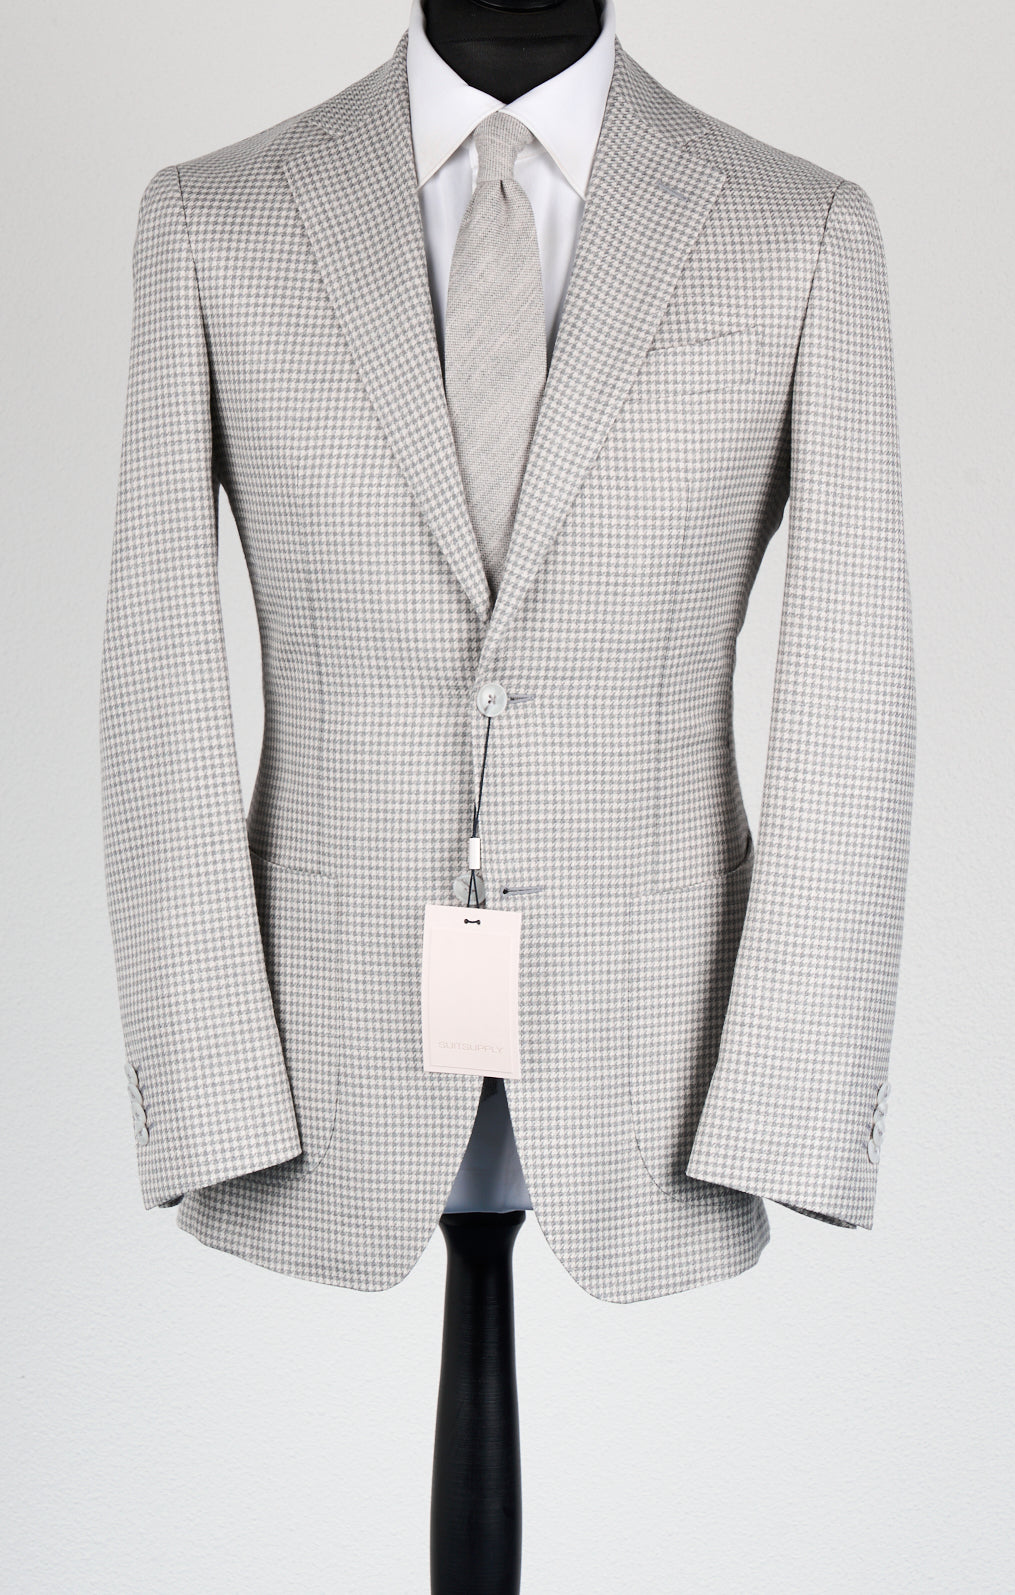 New Suitsupply Havana Light Gray Houndstooth Wool, Mulberry Silk and Linen Blazer - Size 36R, 38R, 40R, 44R